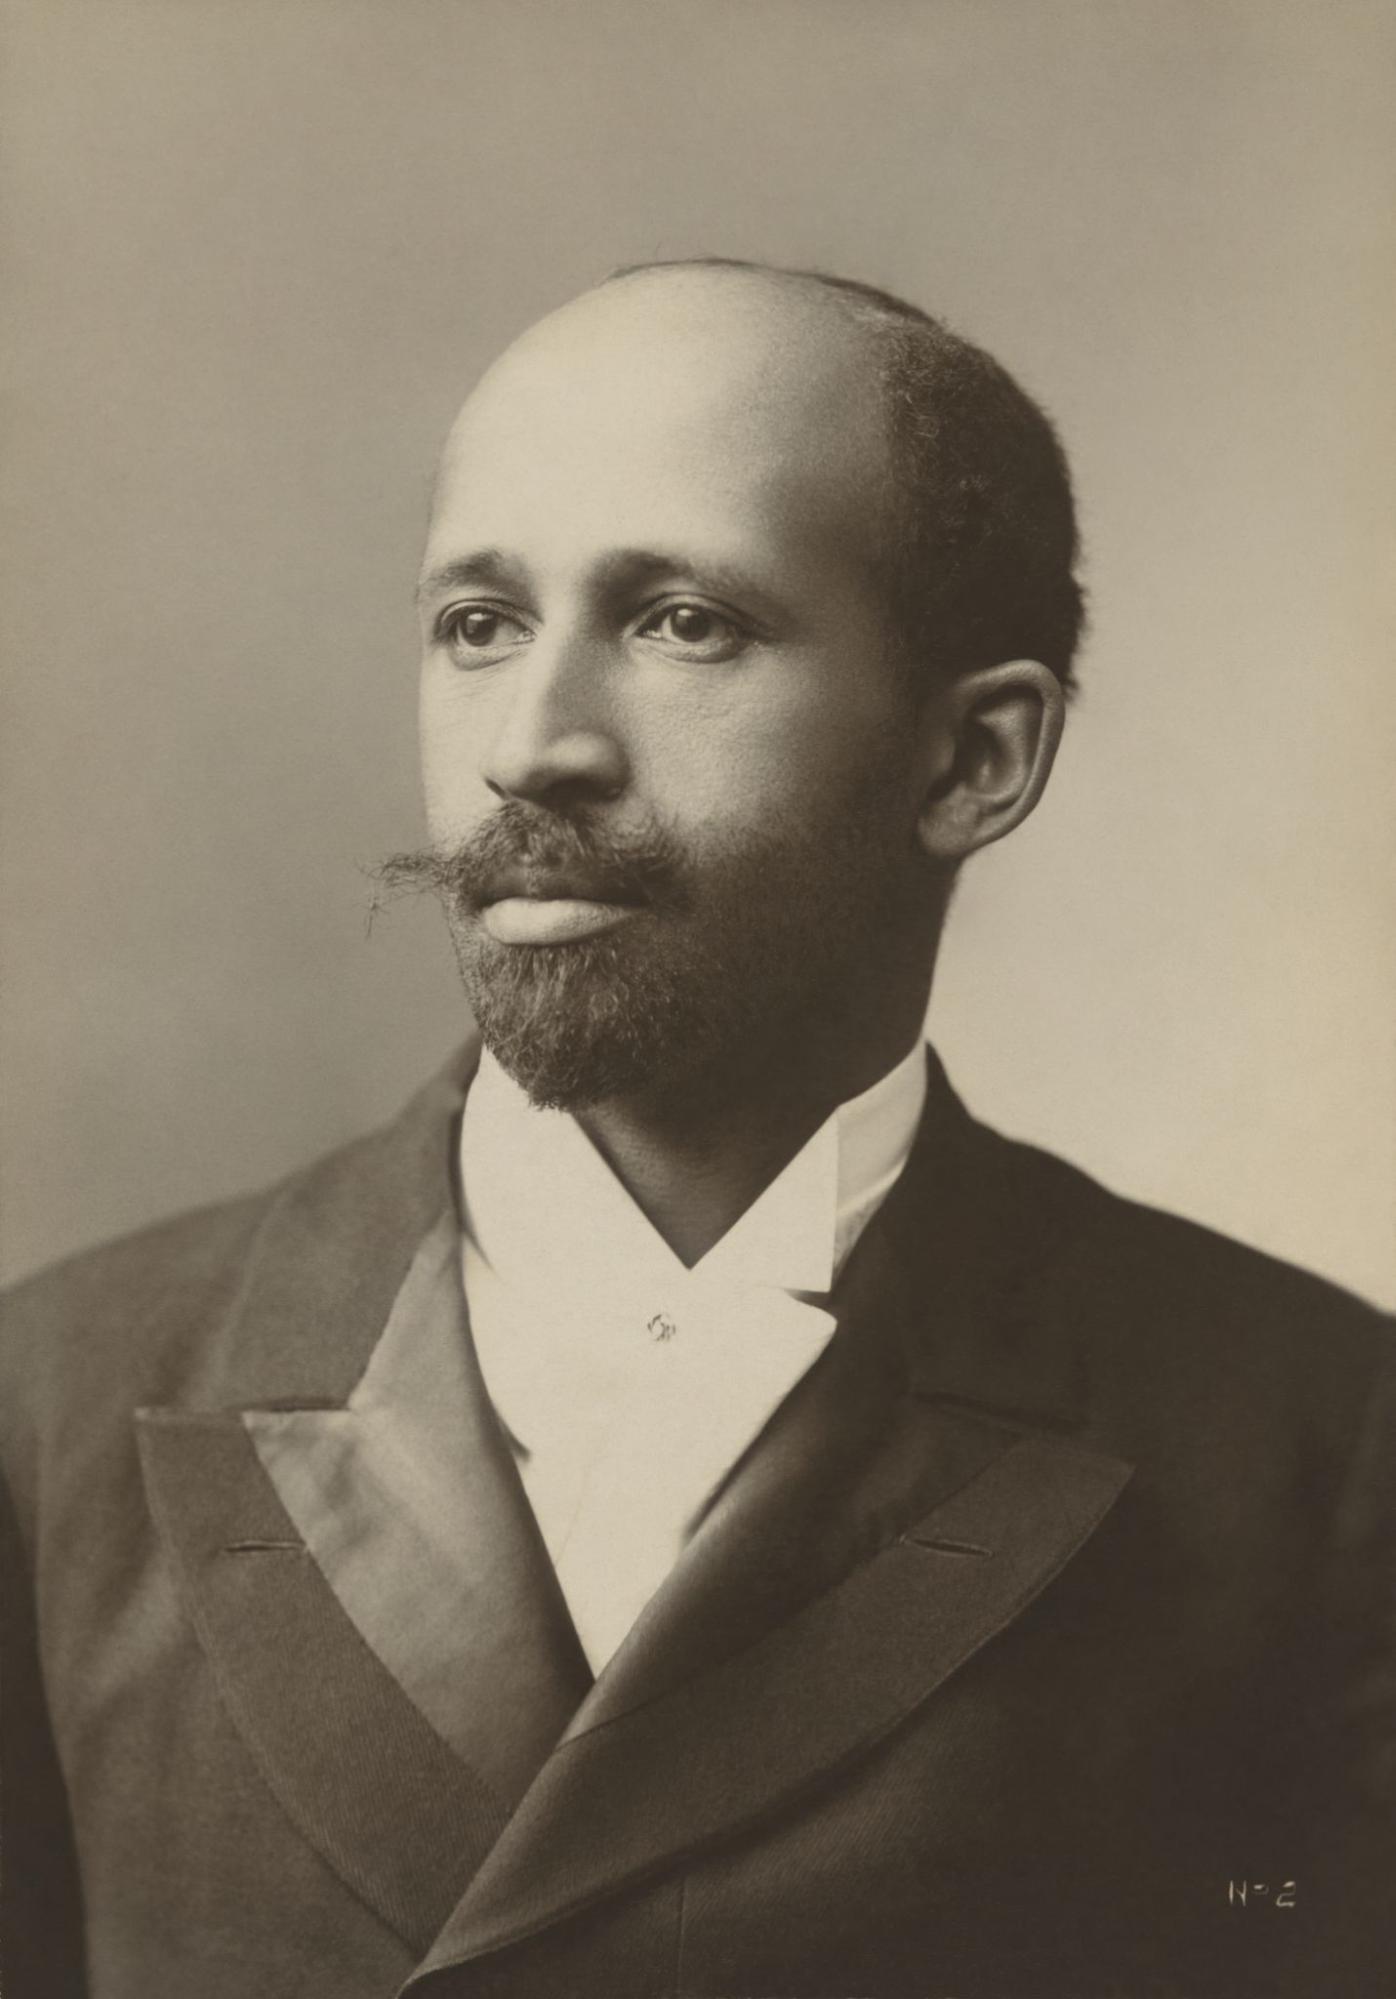 Old black and white photograph of a Black man